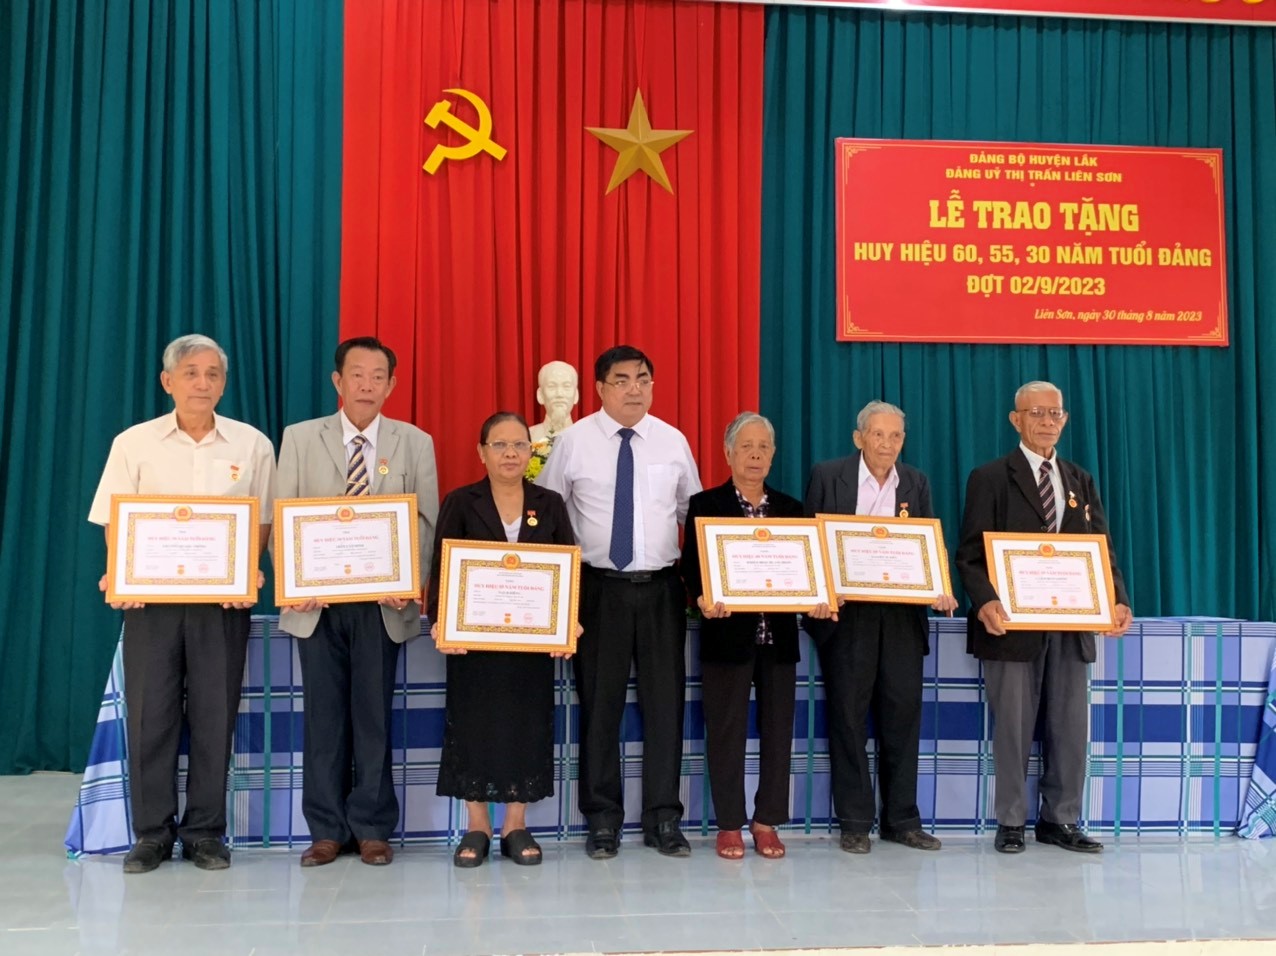 The Lak District Party Committee Awards Party Badges on September 2, 2023